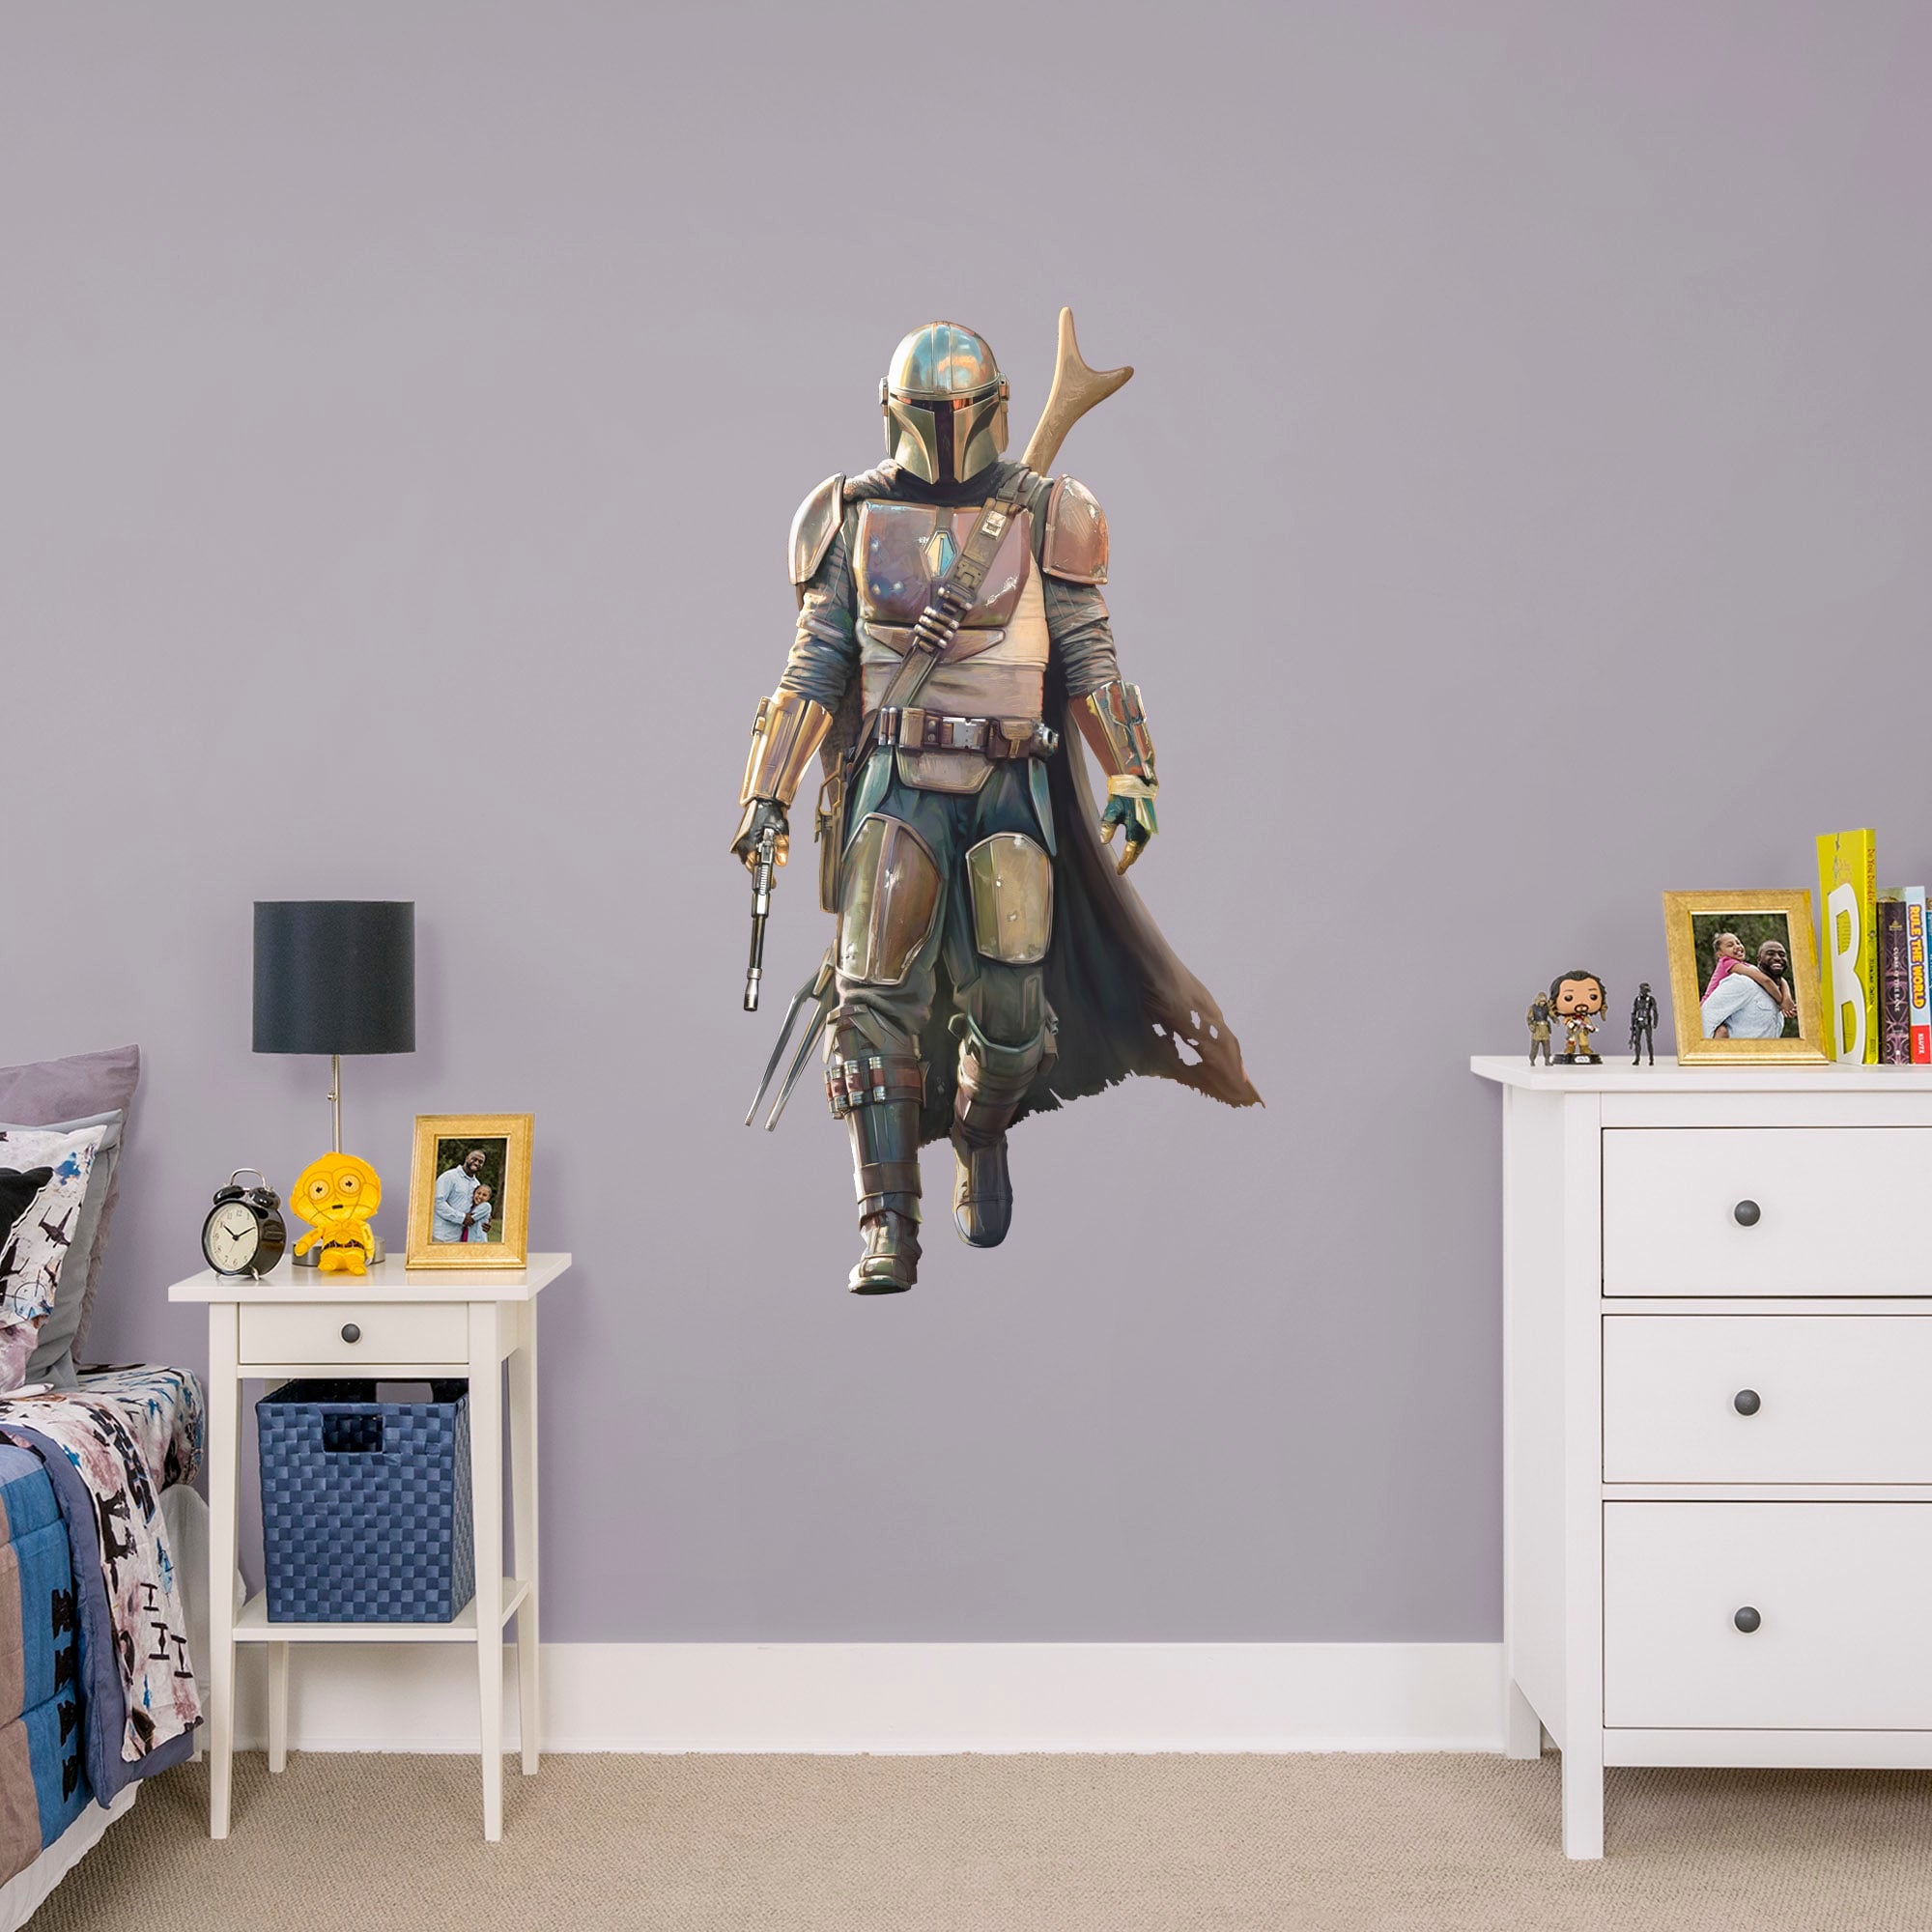 The Mandalorian - Star Wars: The Mandalorian - Officially Licensed Removable Wall Decal Giant Character + 2 Decals (27.5"W x 51"